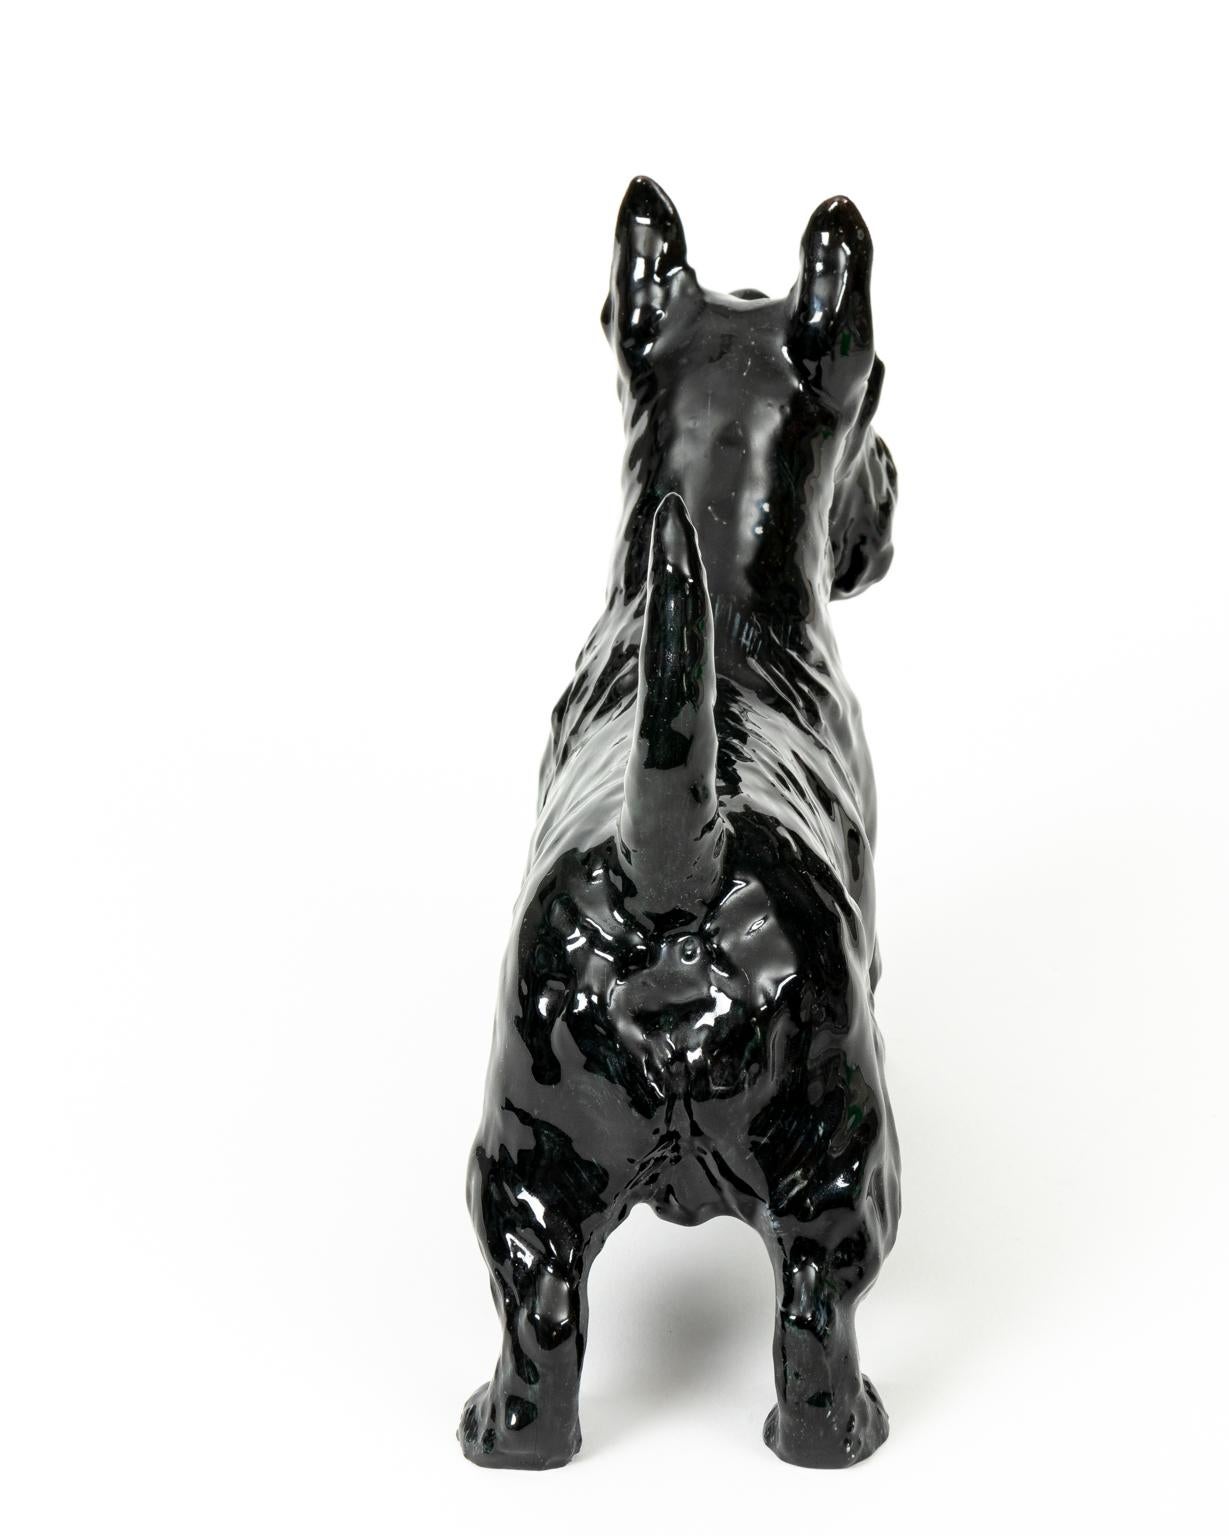 Royal Doulton rare Scottish terrier hn 1008 champion aibourne Arthur, circa 1931-1955. Measures: 7.00 inches high by 9.50 inches long. Grey brush strokes. Rare size. Made in England. Please note of wear consistent with age.